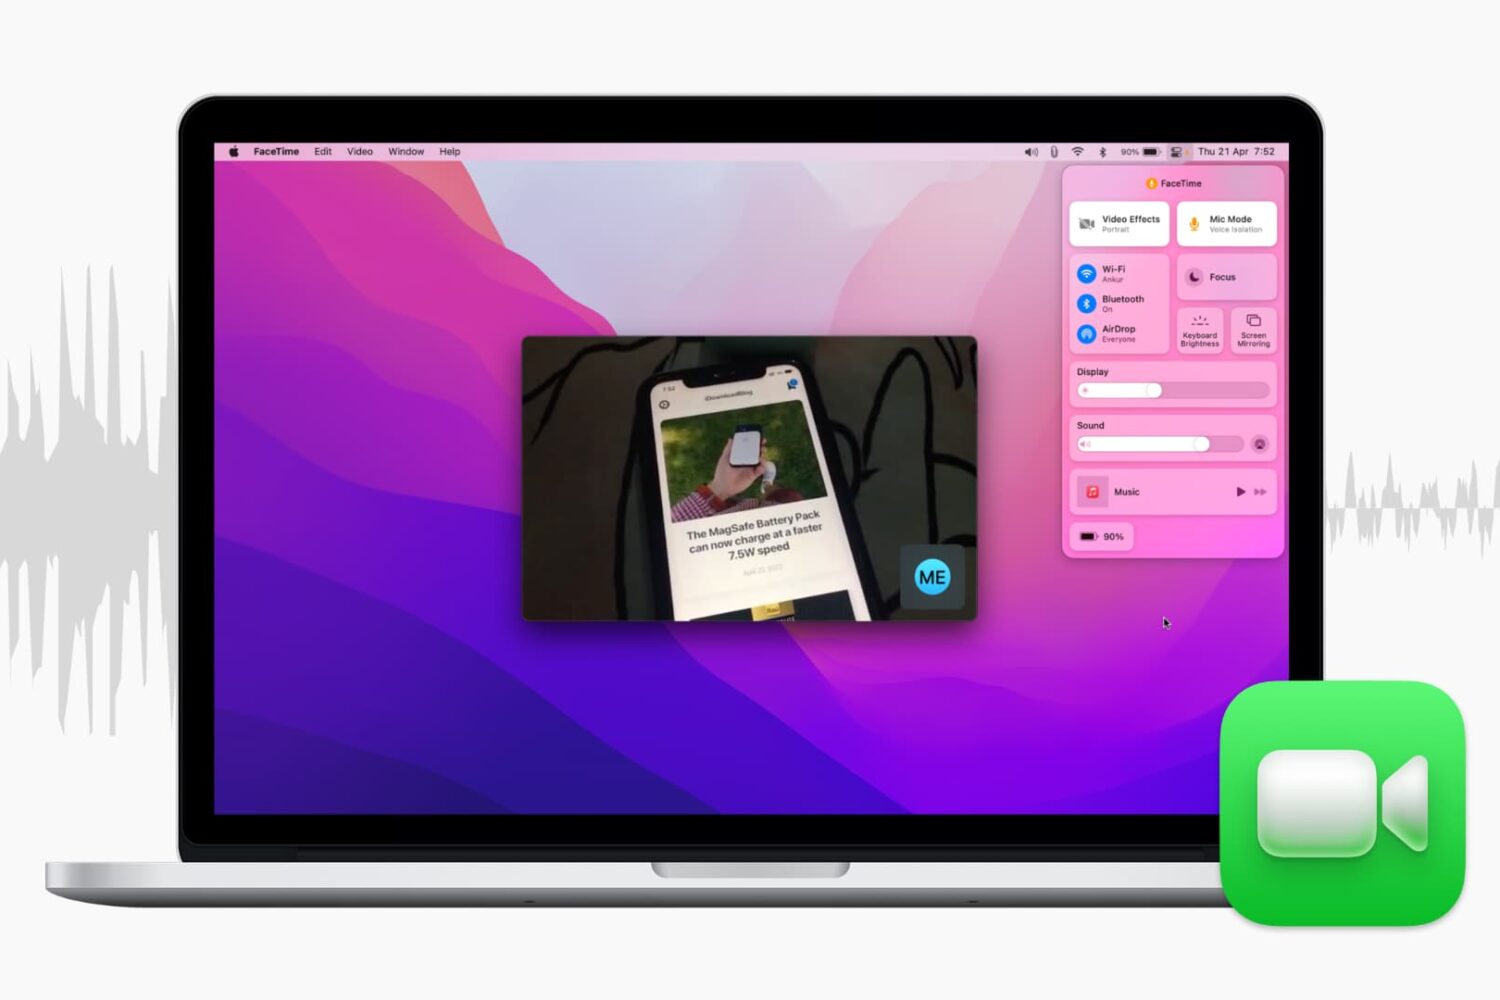 Filter out background sound in video calls on Mac